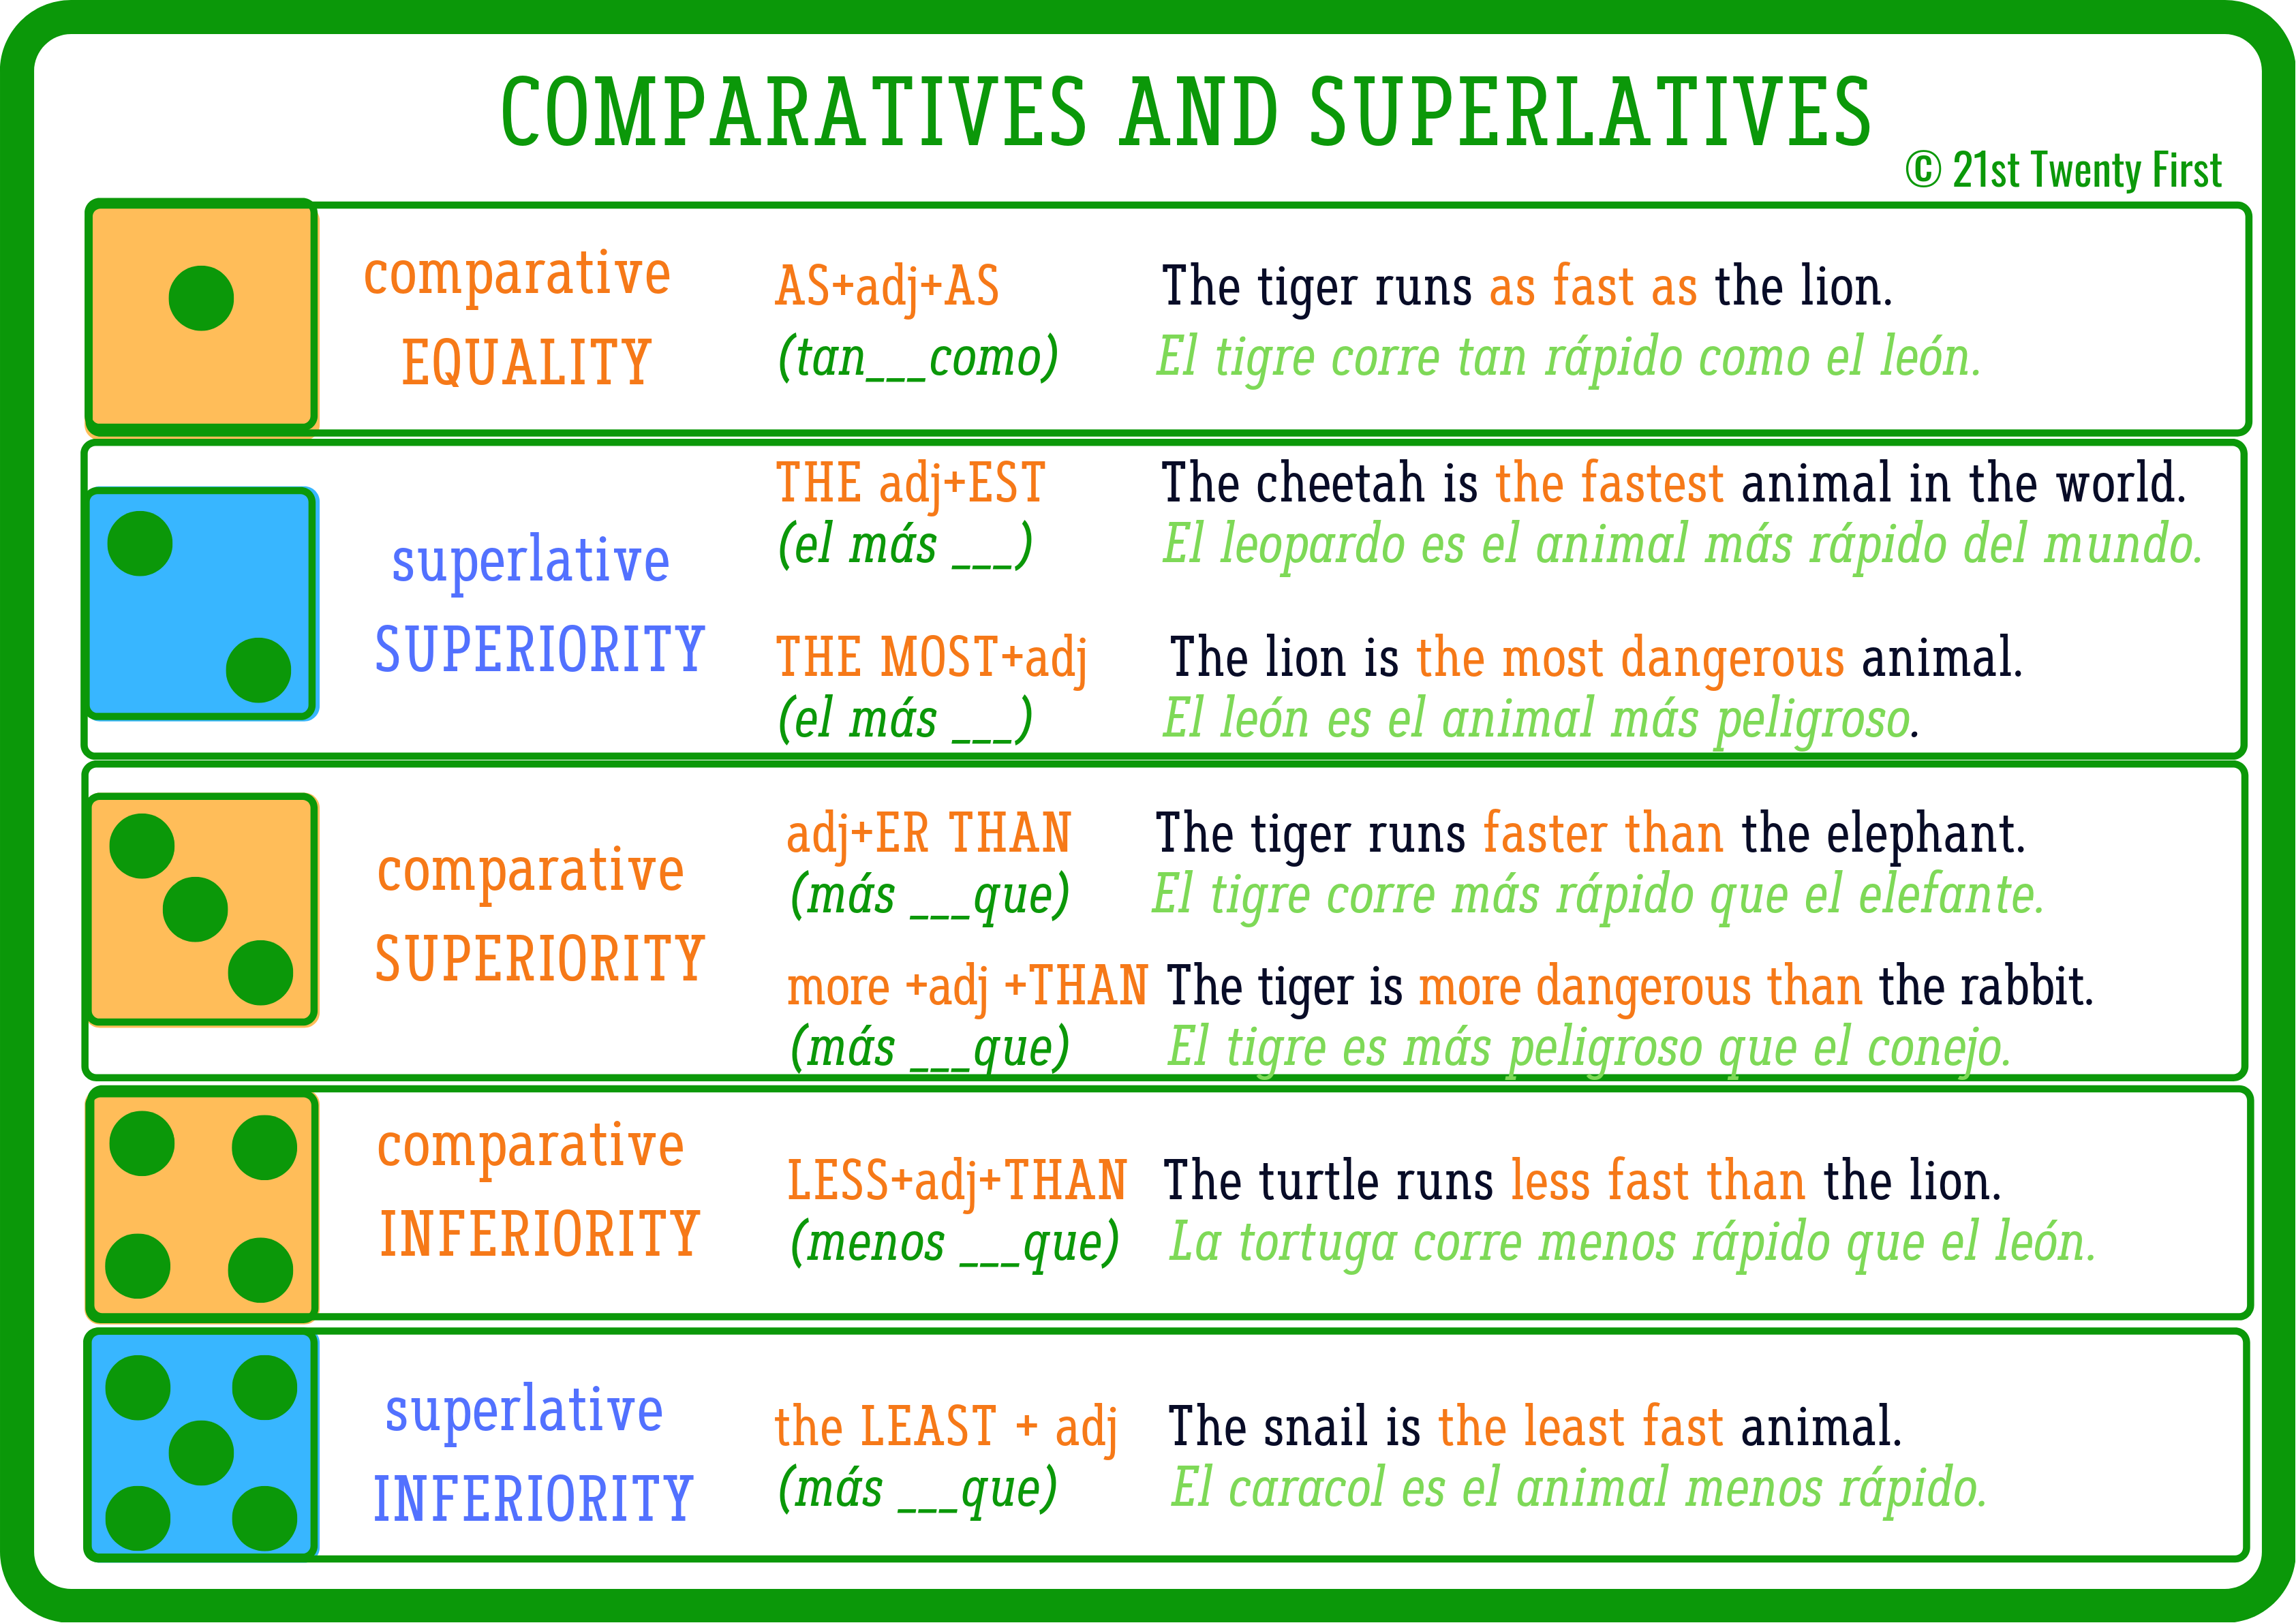 Comparative and superlative words. Comparatives and Superlatives исключения. Comparatives and Superlatives правило. Less Comparative and Superlative. Fast Comparative and Superlative.